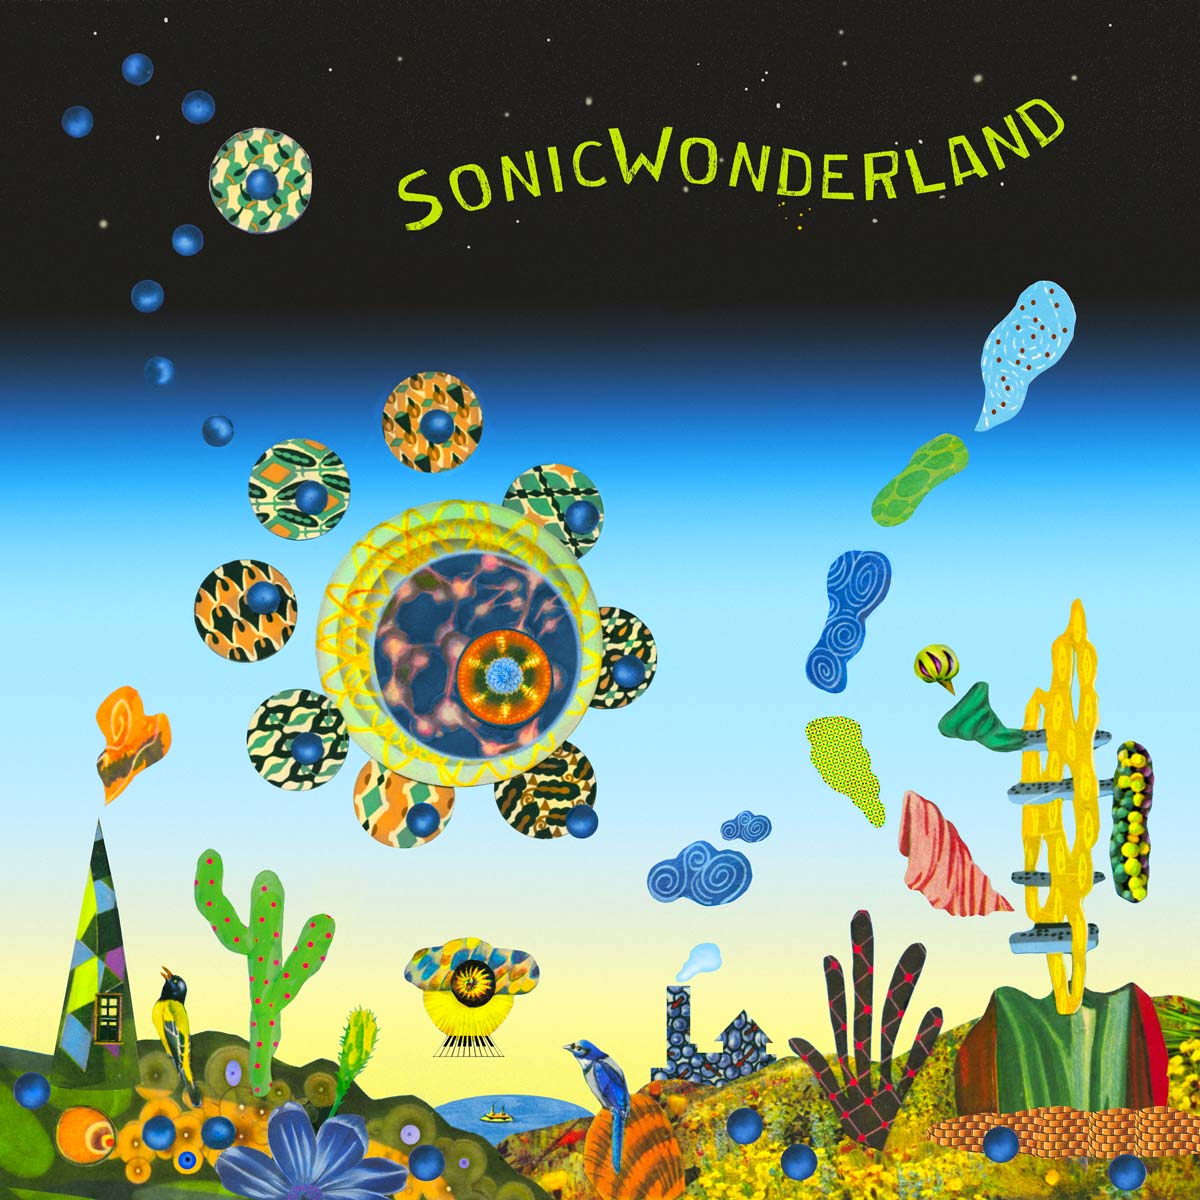 The+cover+art+for+%E2%80%9CSonicwonderland%E2%80%9D+was+designed+by+Lou+Beach%2C+who+also+designed+the+album+covers+for+several+iconic+Weather+Report+albums+%28Lou+Beach%29.